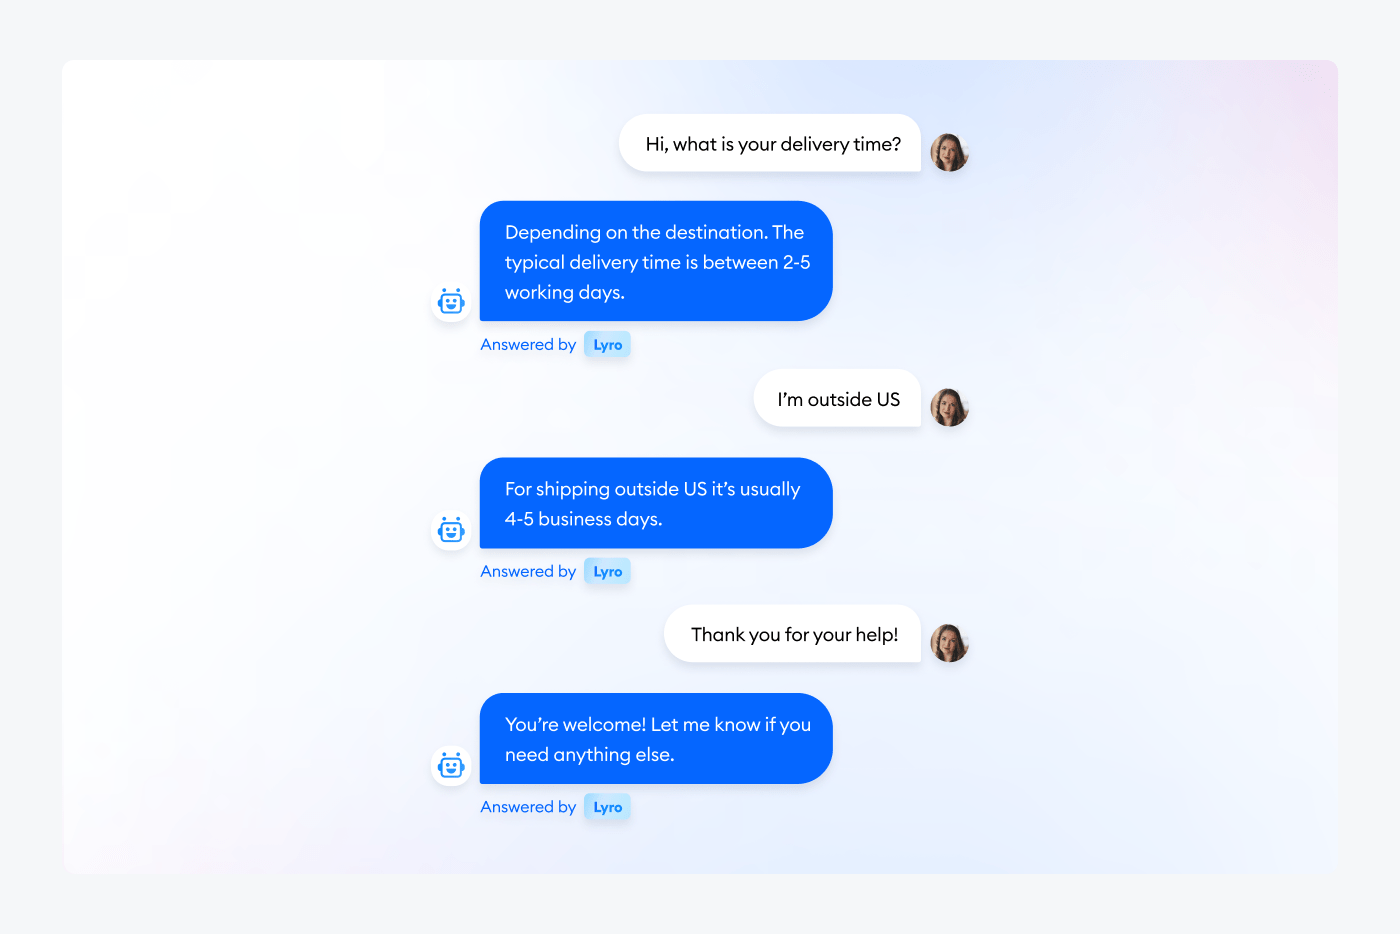 recommending relevant products via chatbots